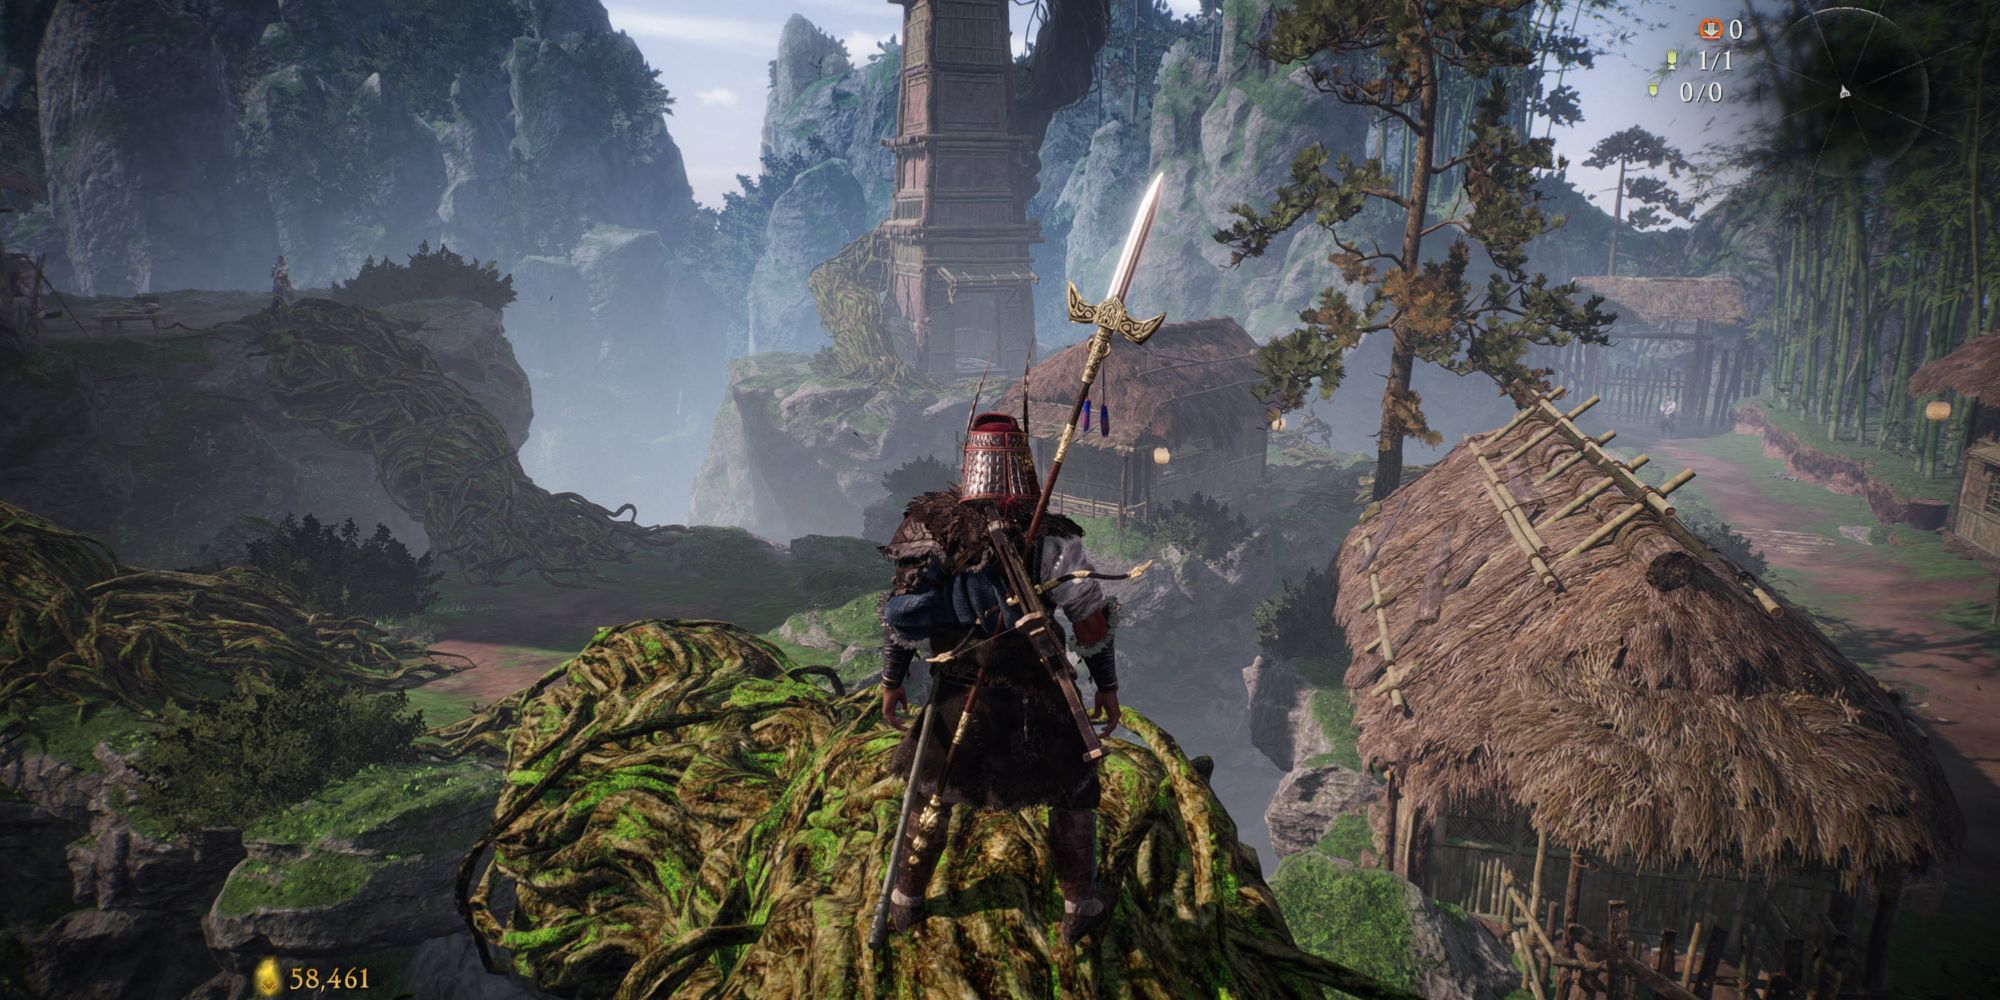 Protagonist looking out across the Hidden Village landscape in Wo Long